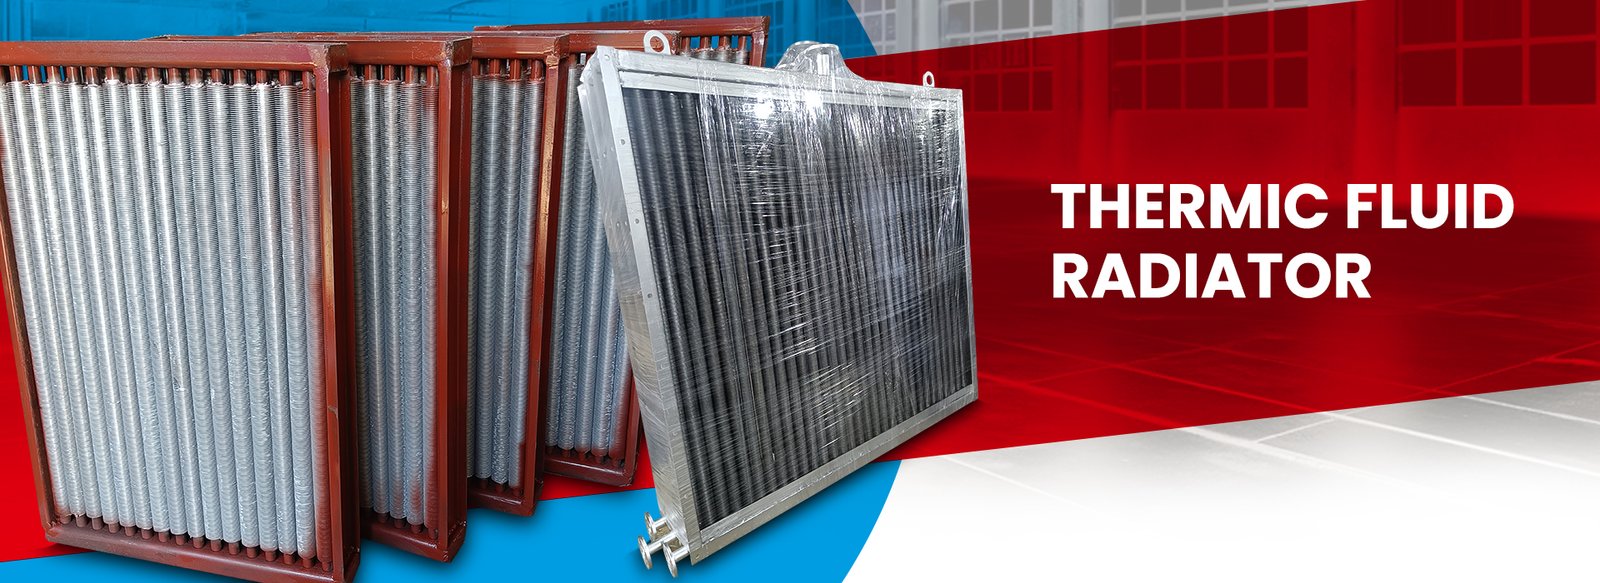 Thermic Fluid Radiator - Thermal Energy Solutions